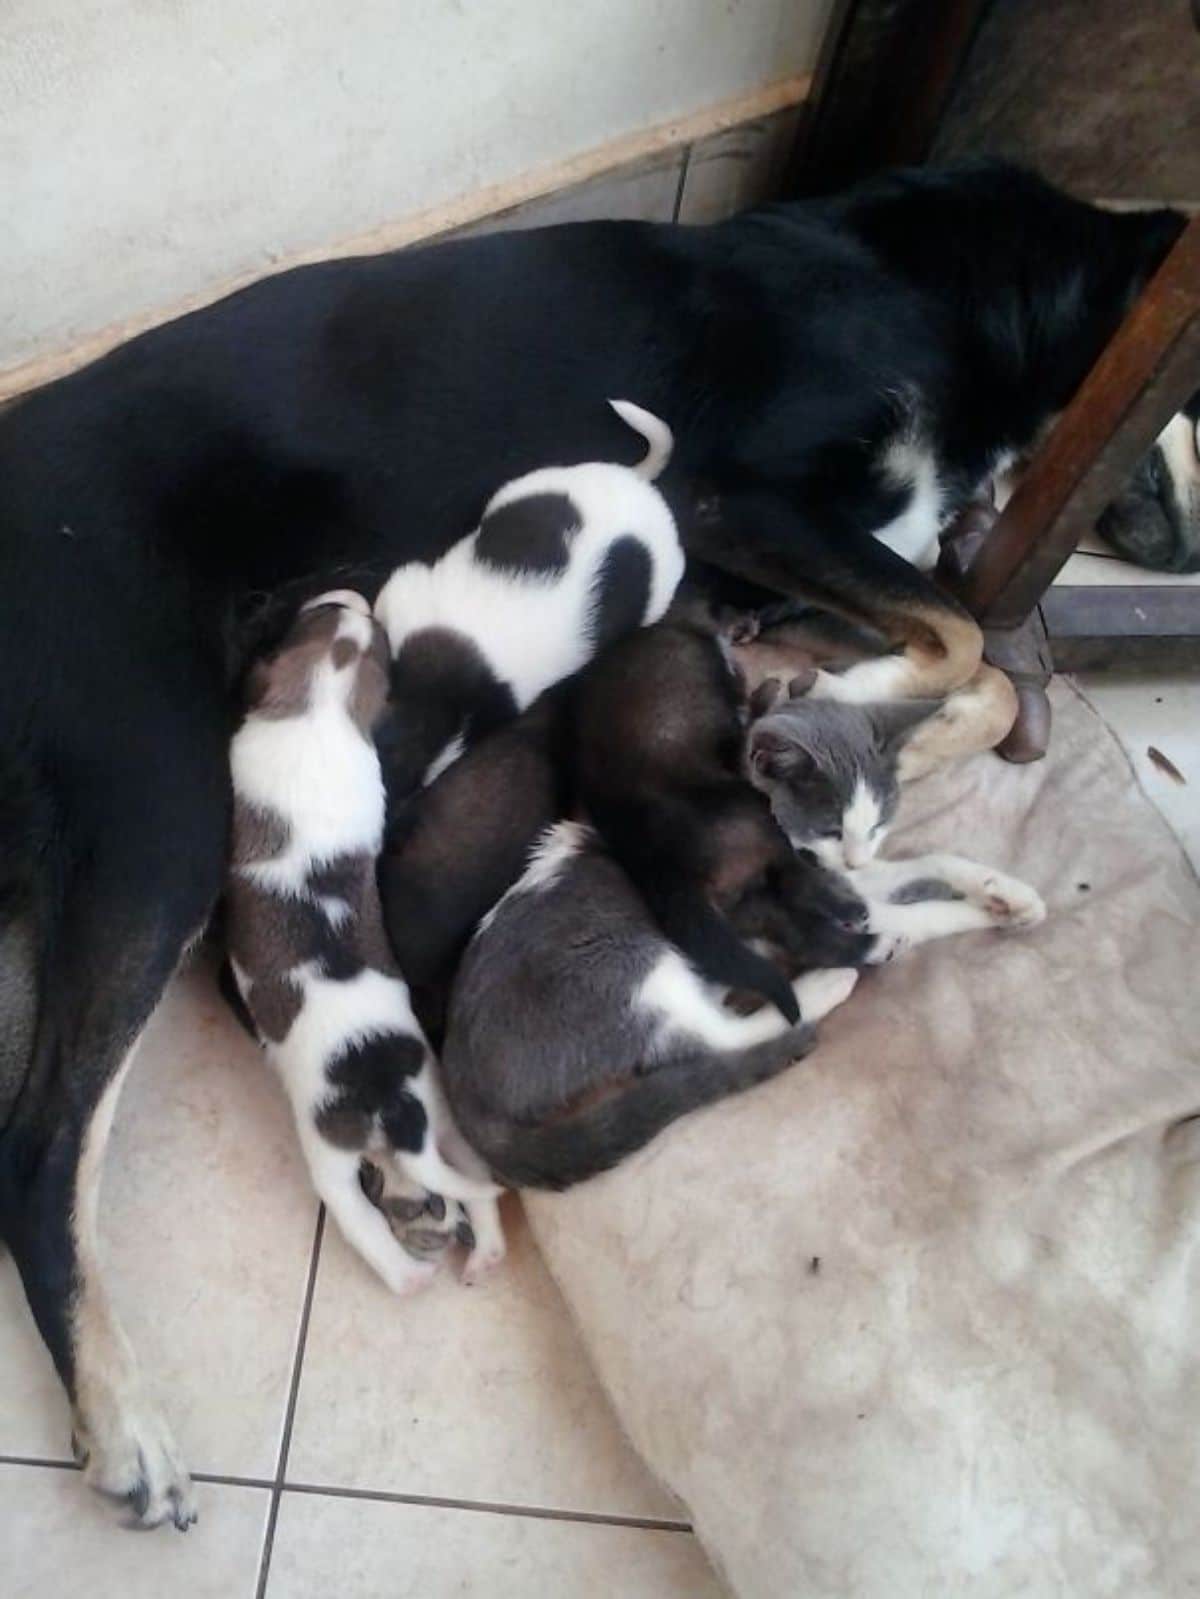 puppies nursing from a black and white dog with a grey and white cat laying under a black puppy